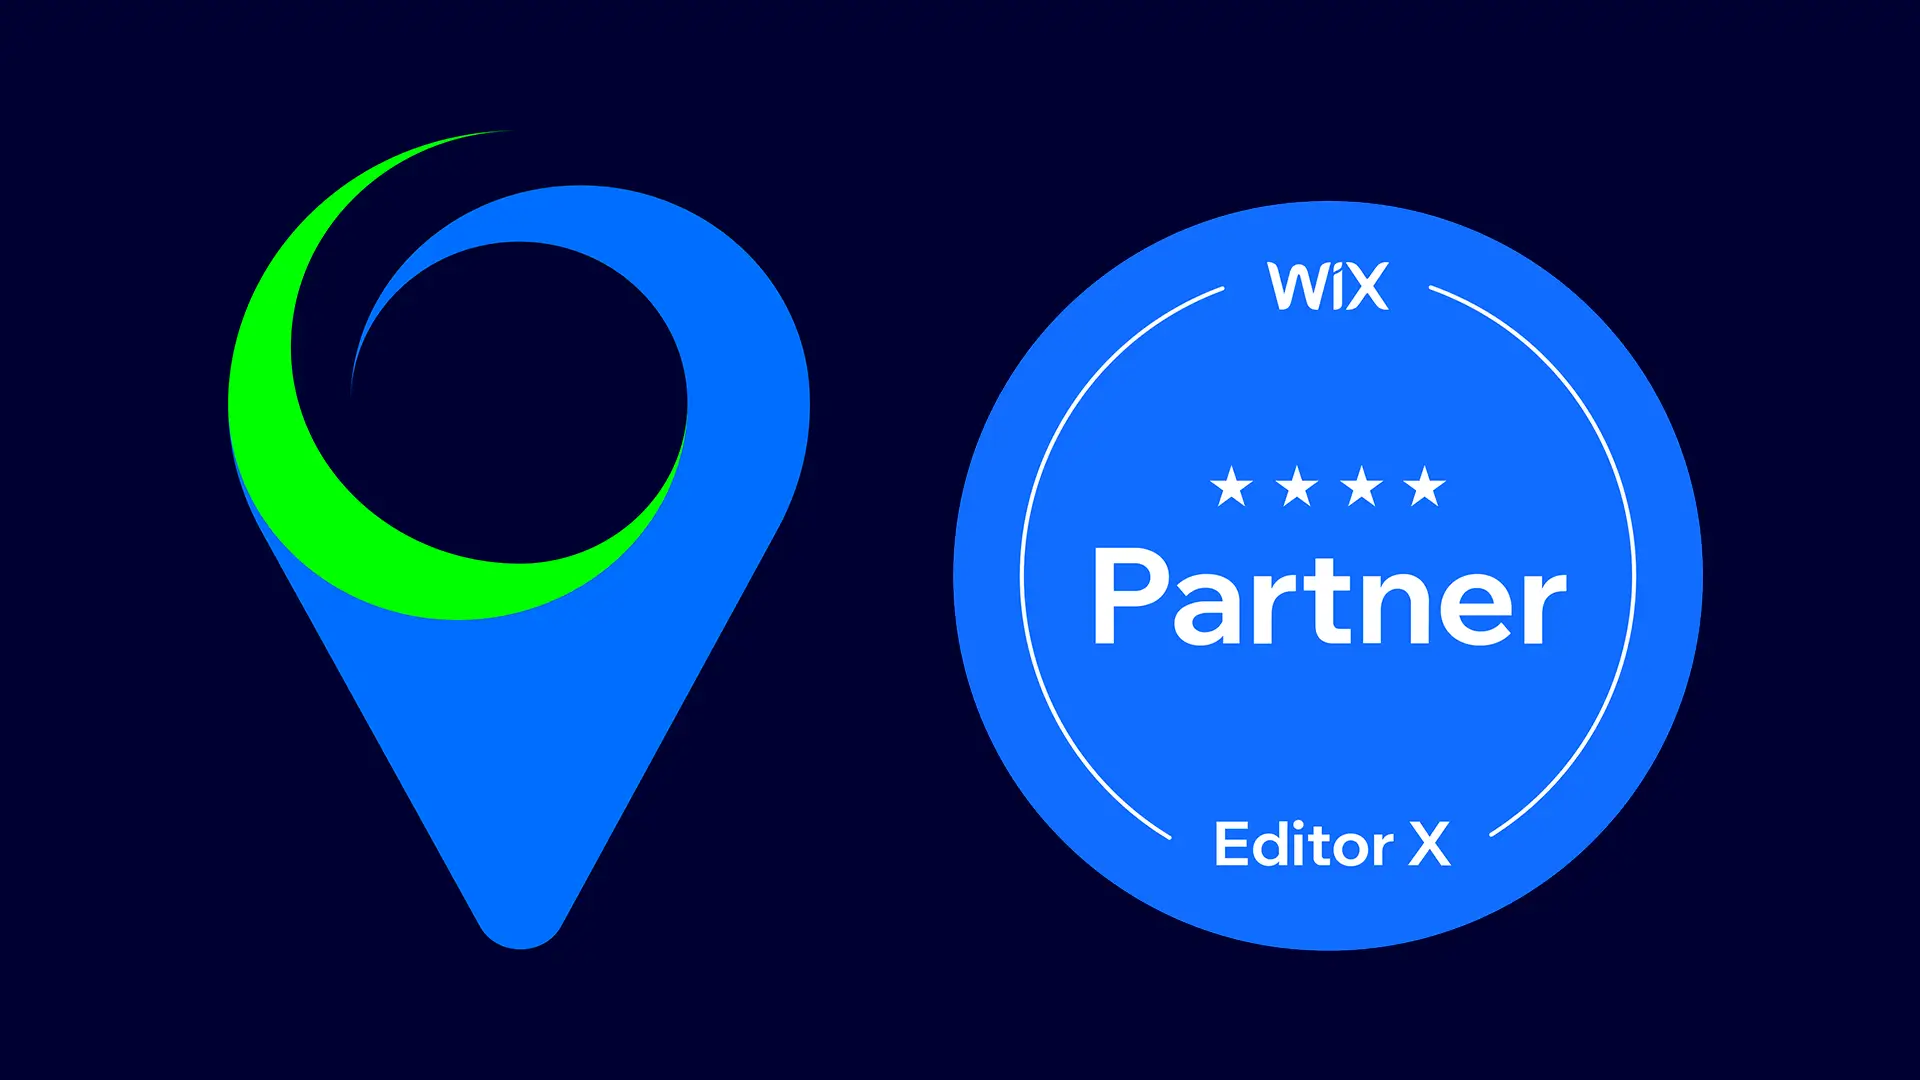 An image of LoudLocal's logo next to the Wix Partner logo on a dark blue backgroun